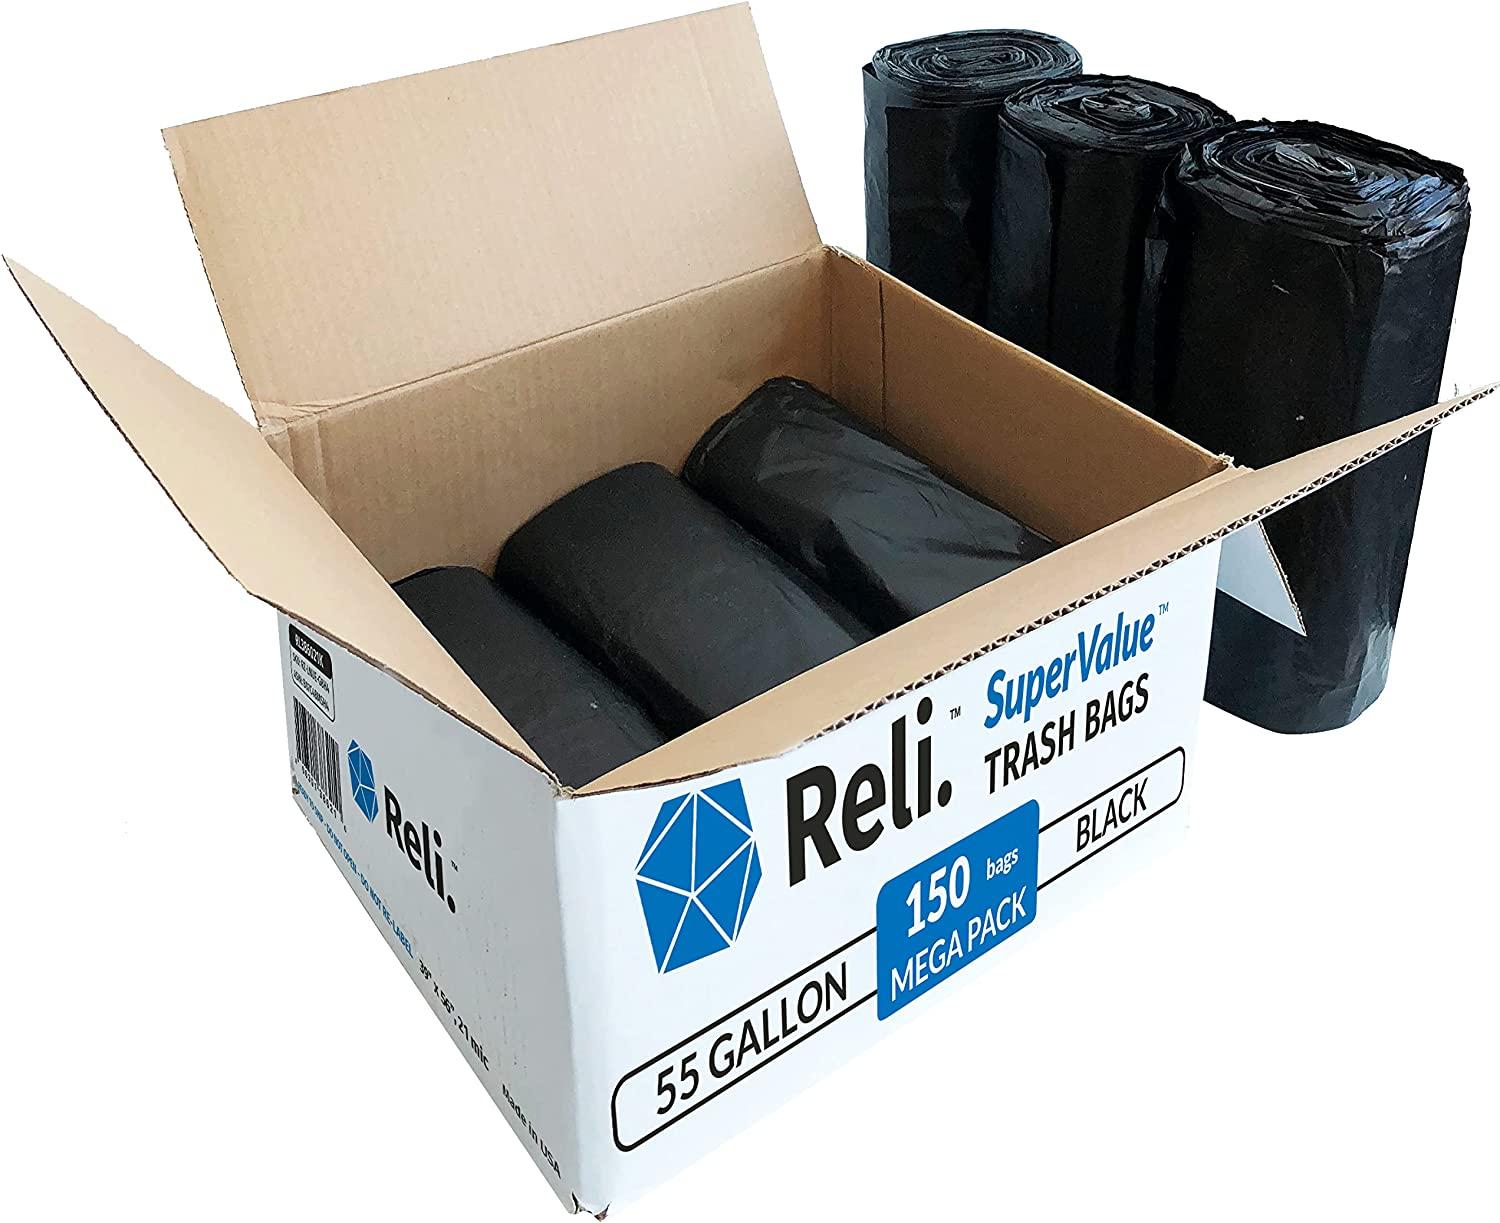 Reli. Easy Grab Trash Bags, 55-60 Gallon (150 Count), Made in USA  Star  Seal Super High Density Rolls (Heavy Duty Can Liners, Garbage Bags, Bulk  Contractor Bags 50, 55, 60 Gallon Capacity) - Black 150 Count (Pack of 1)